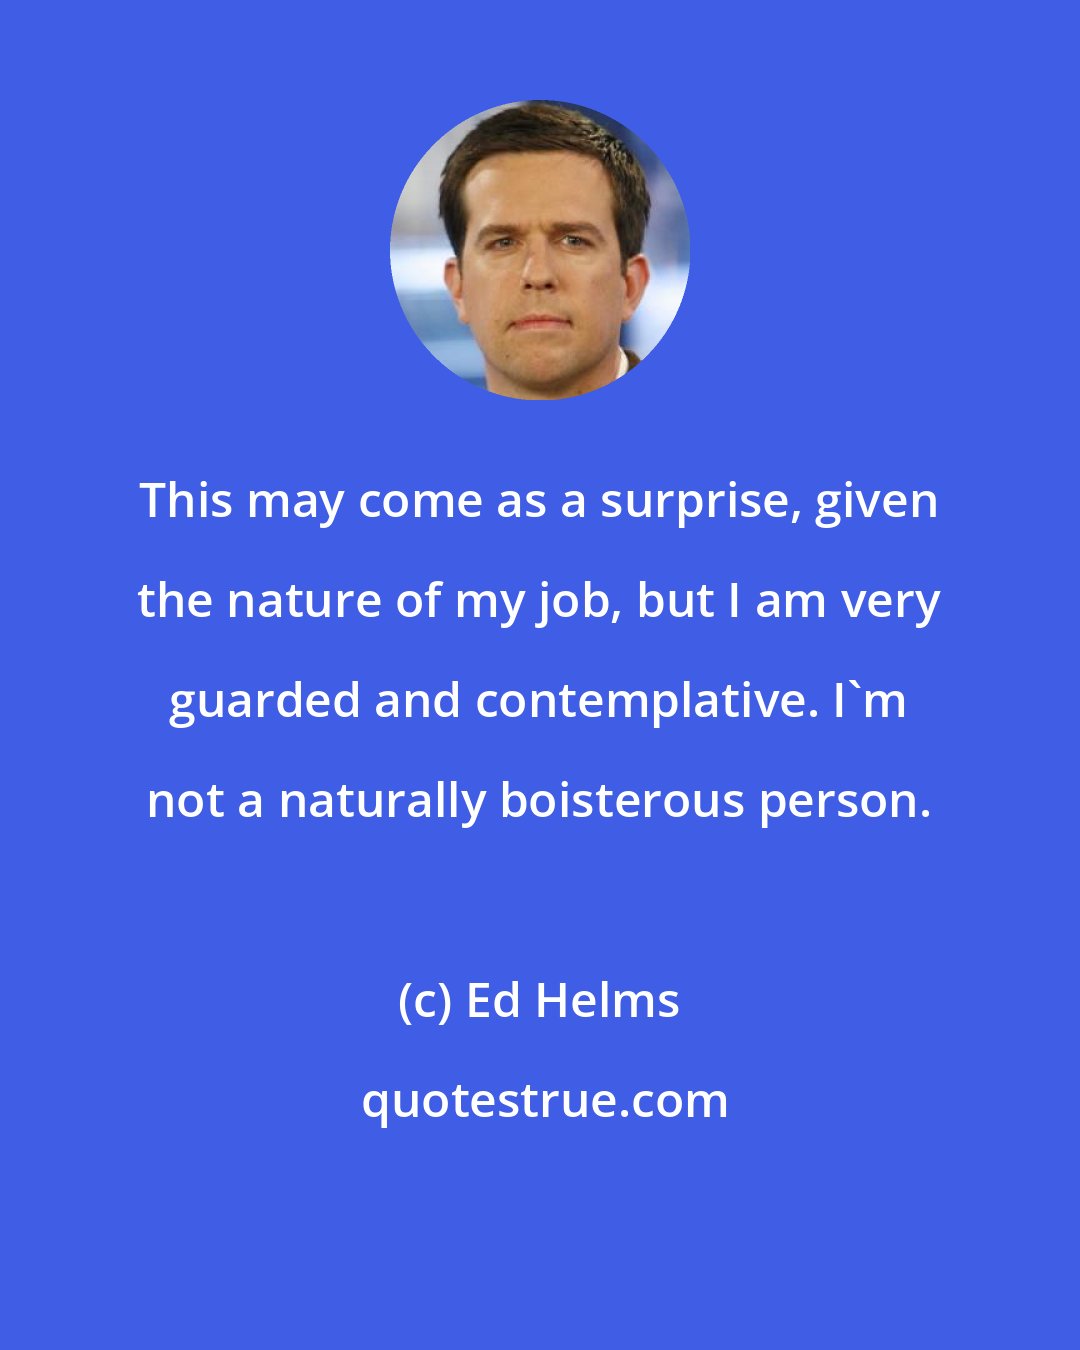 Ed Helms: This may come as a surprise, given the nature of my job, but I am very guarded and contemplative. I'm not a naturally boisterous person.